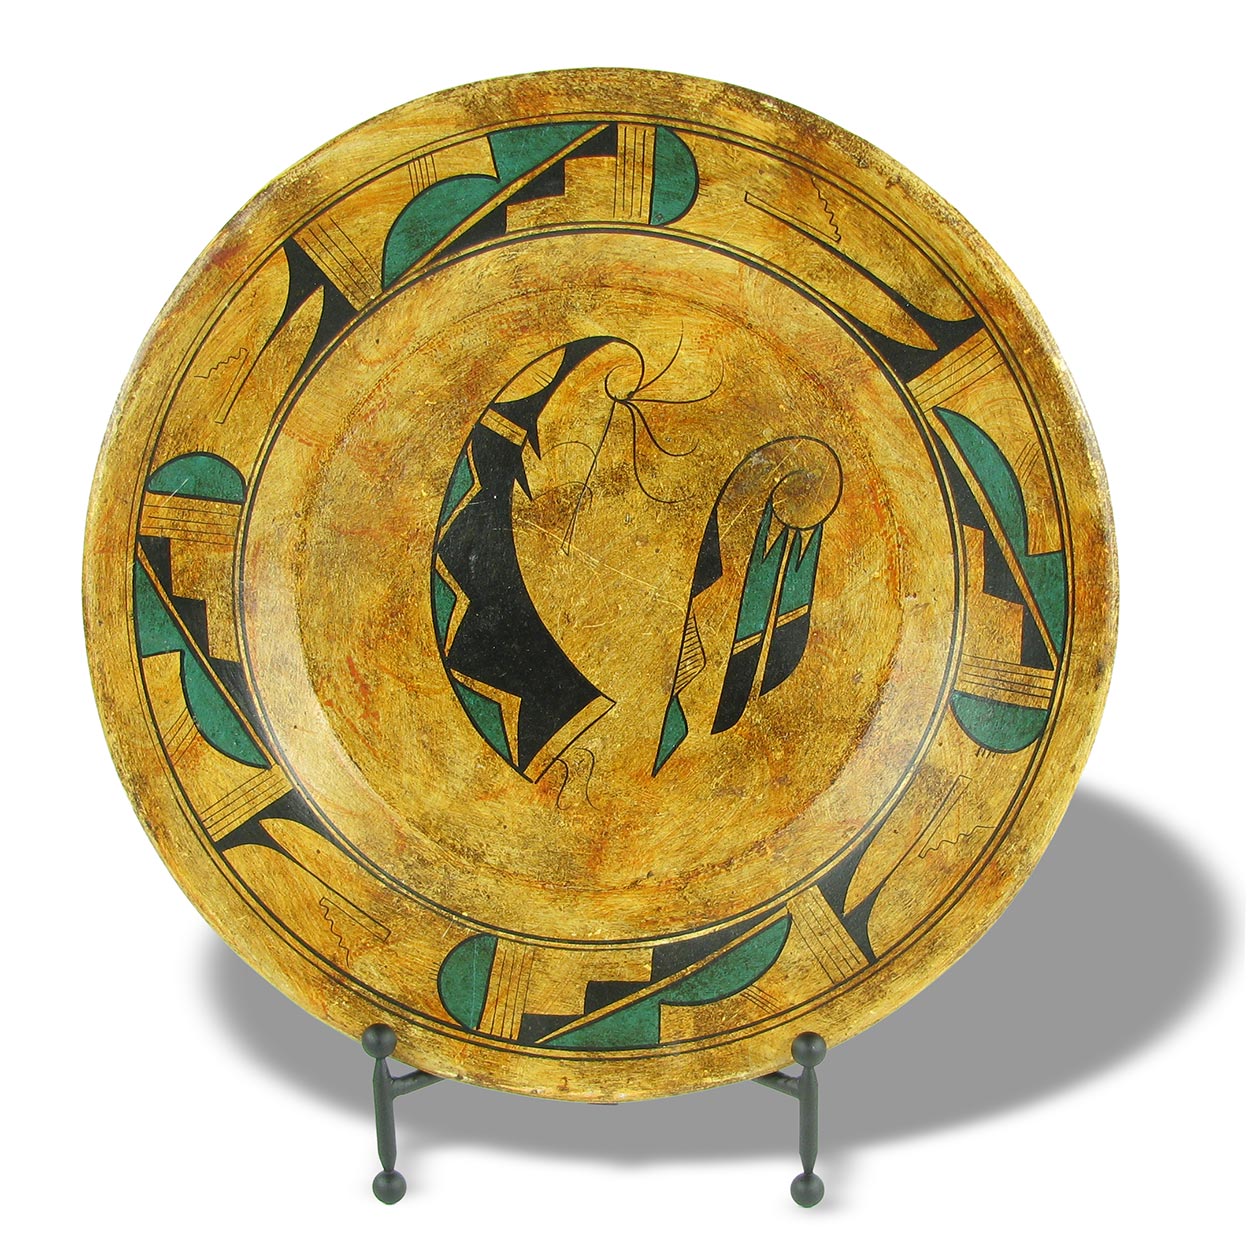 161250-147 - One-of-a-Kind Painted 16.5in Decorative Southwest Plate - Kokopelli Design